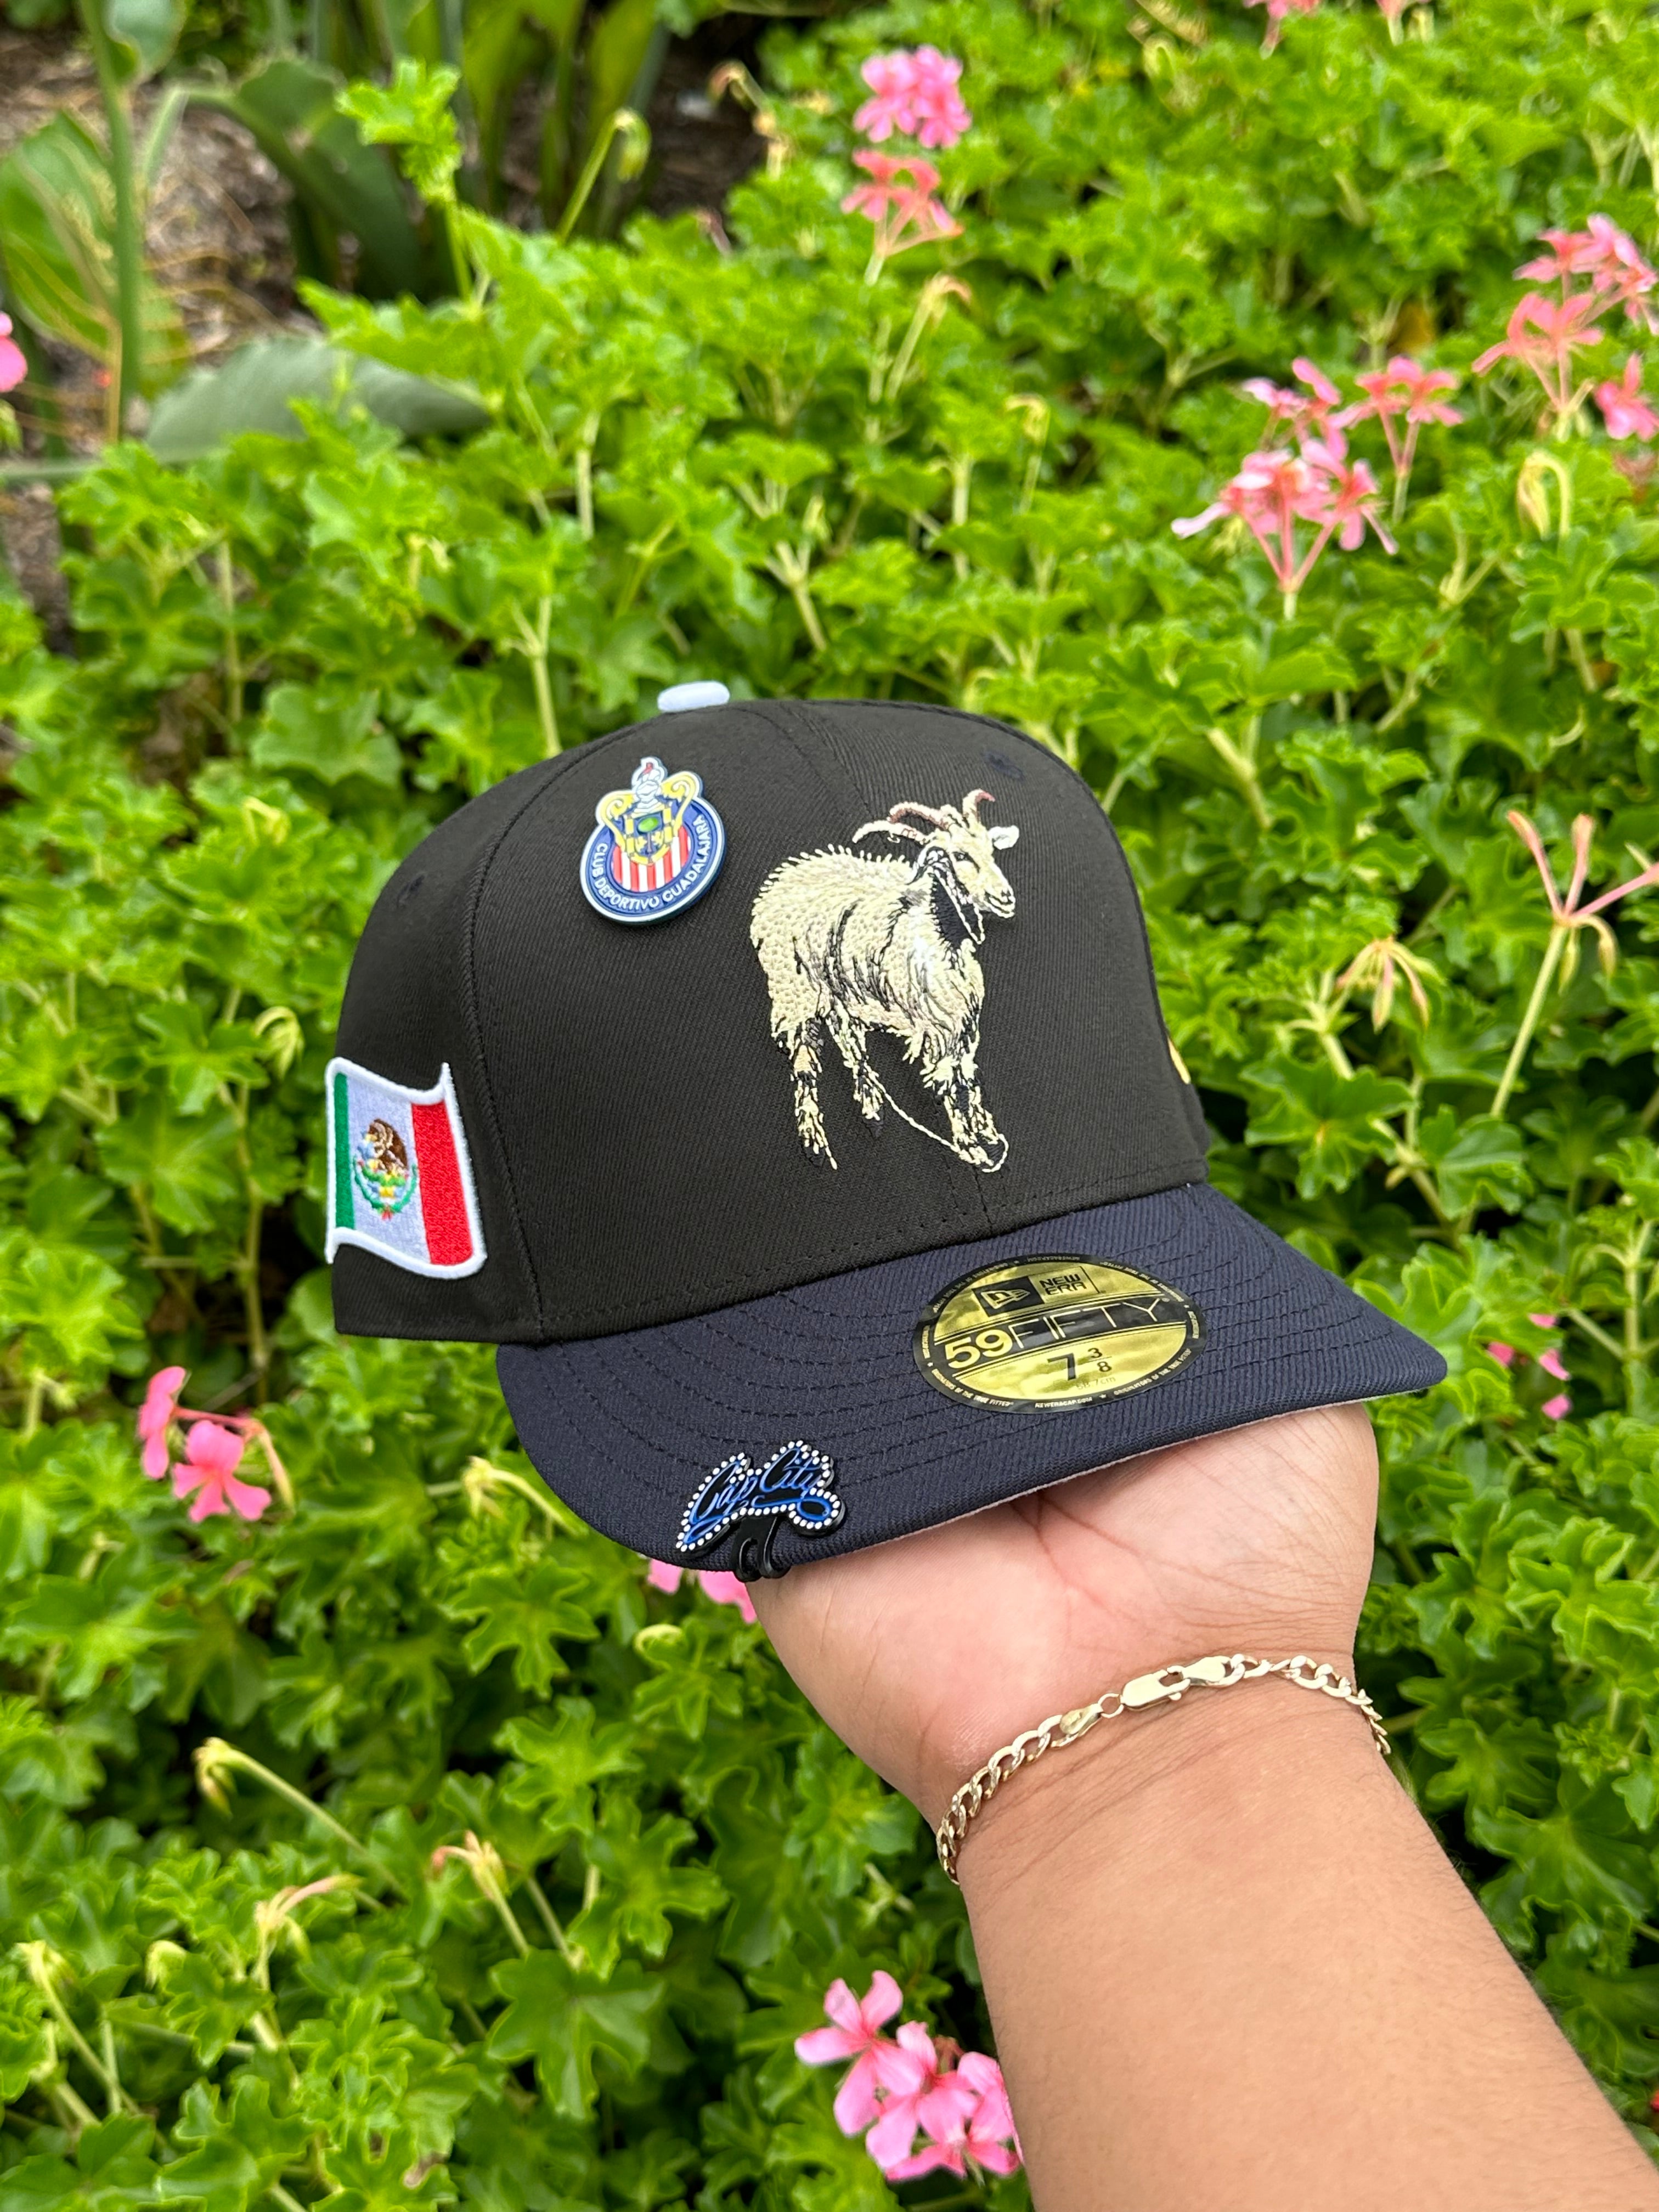 NEW ERA EXCLUSIVE 59FIFTY BLACK/NAVY MEXICO "THE GOAT" W/ MEXICO FLAG PATCH